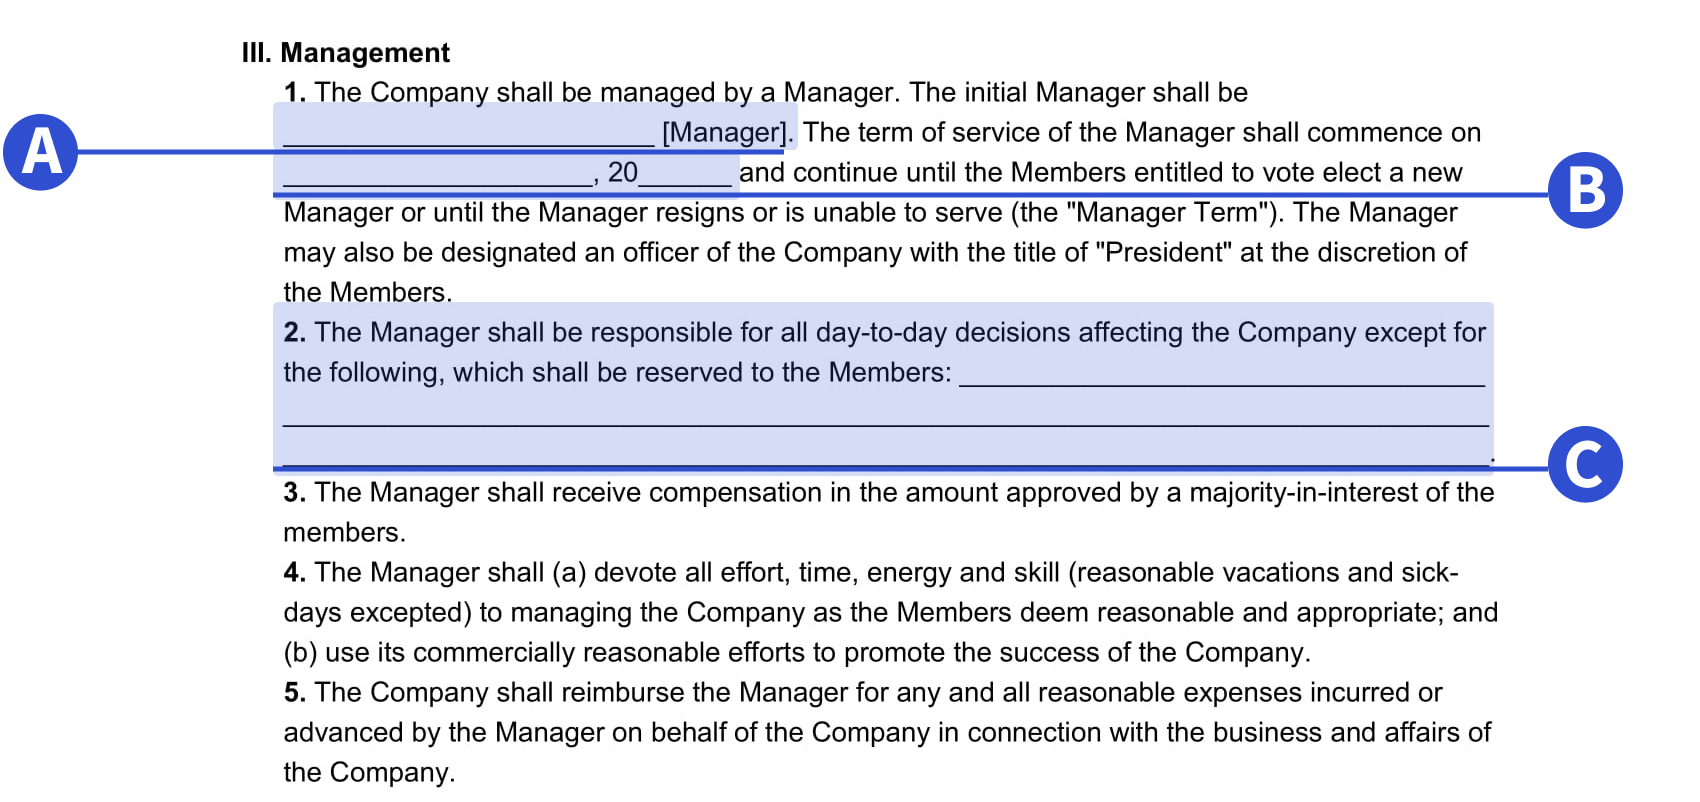 An example of where to include management details in our LLC operating agreement template.